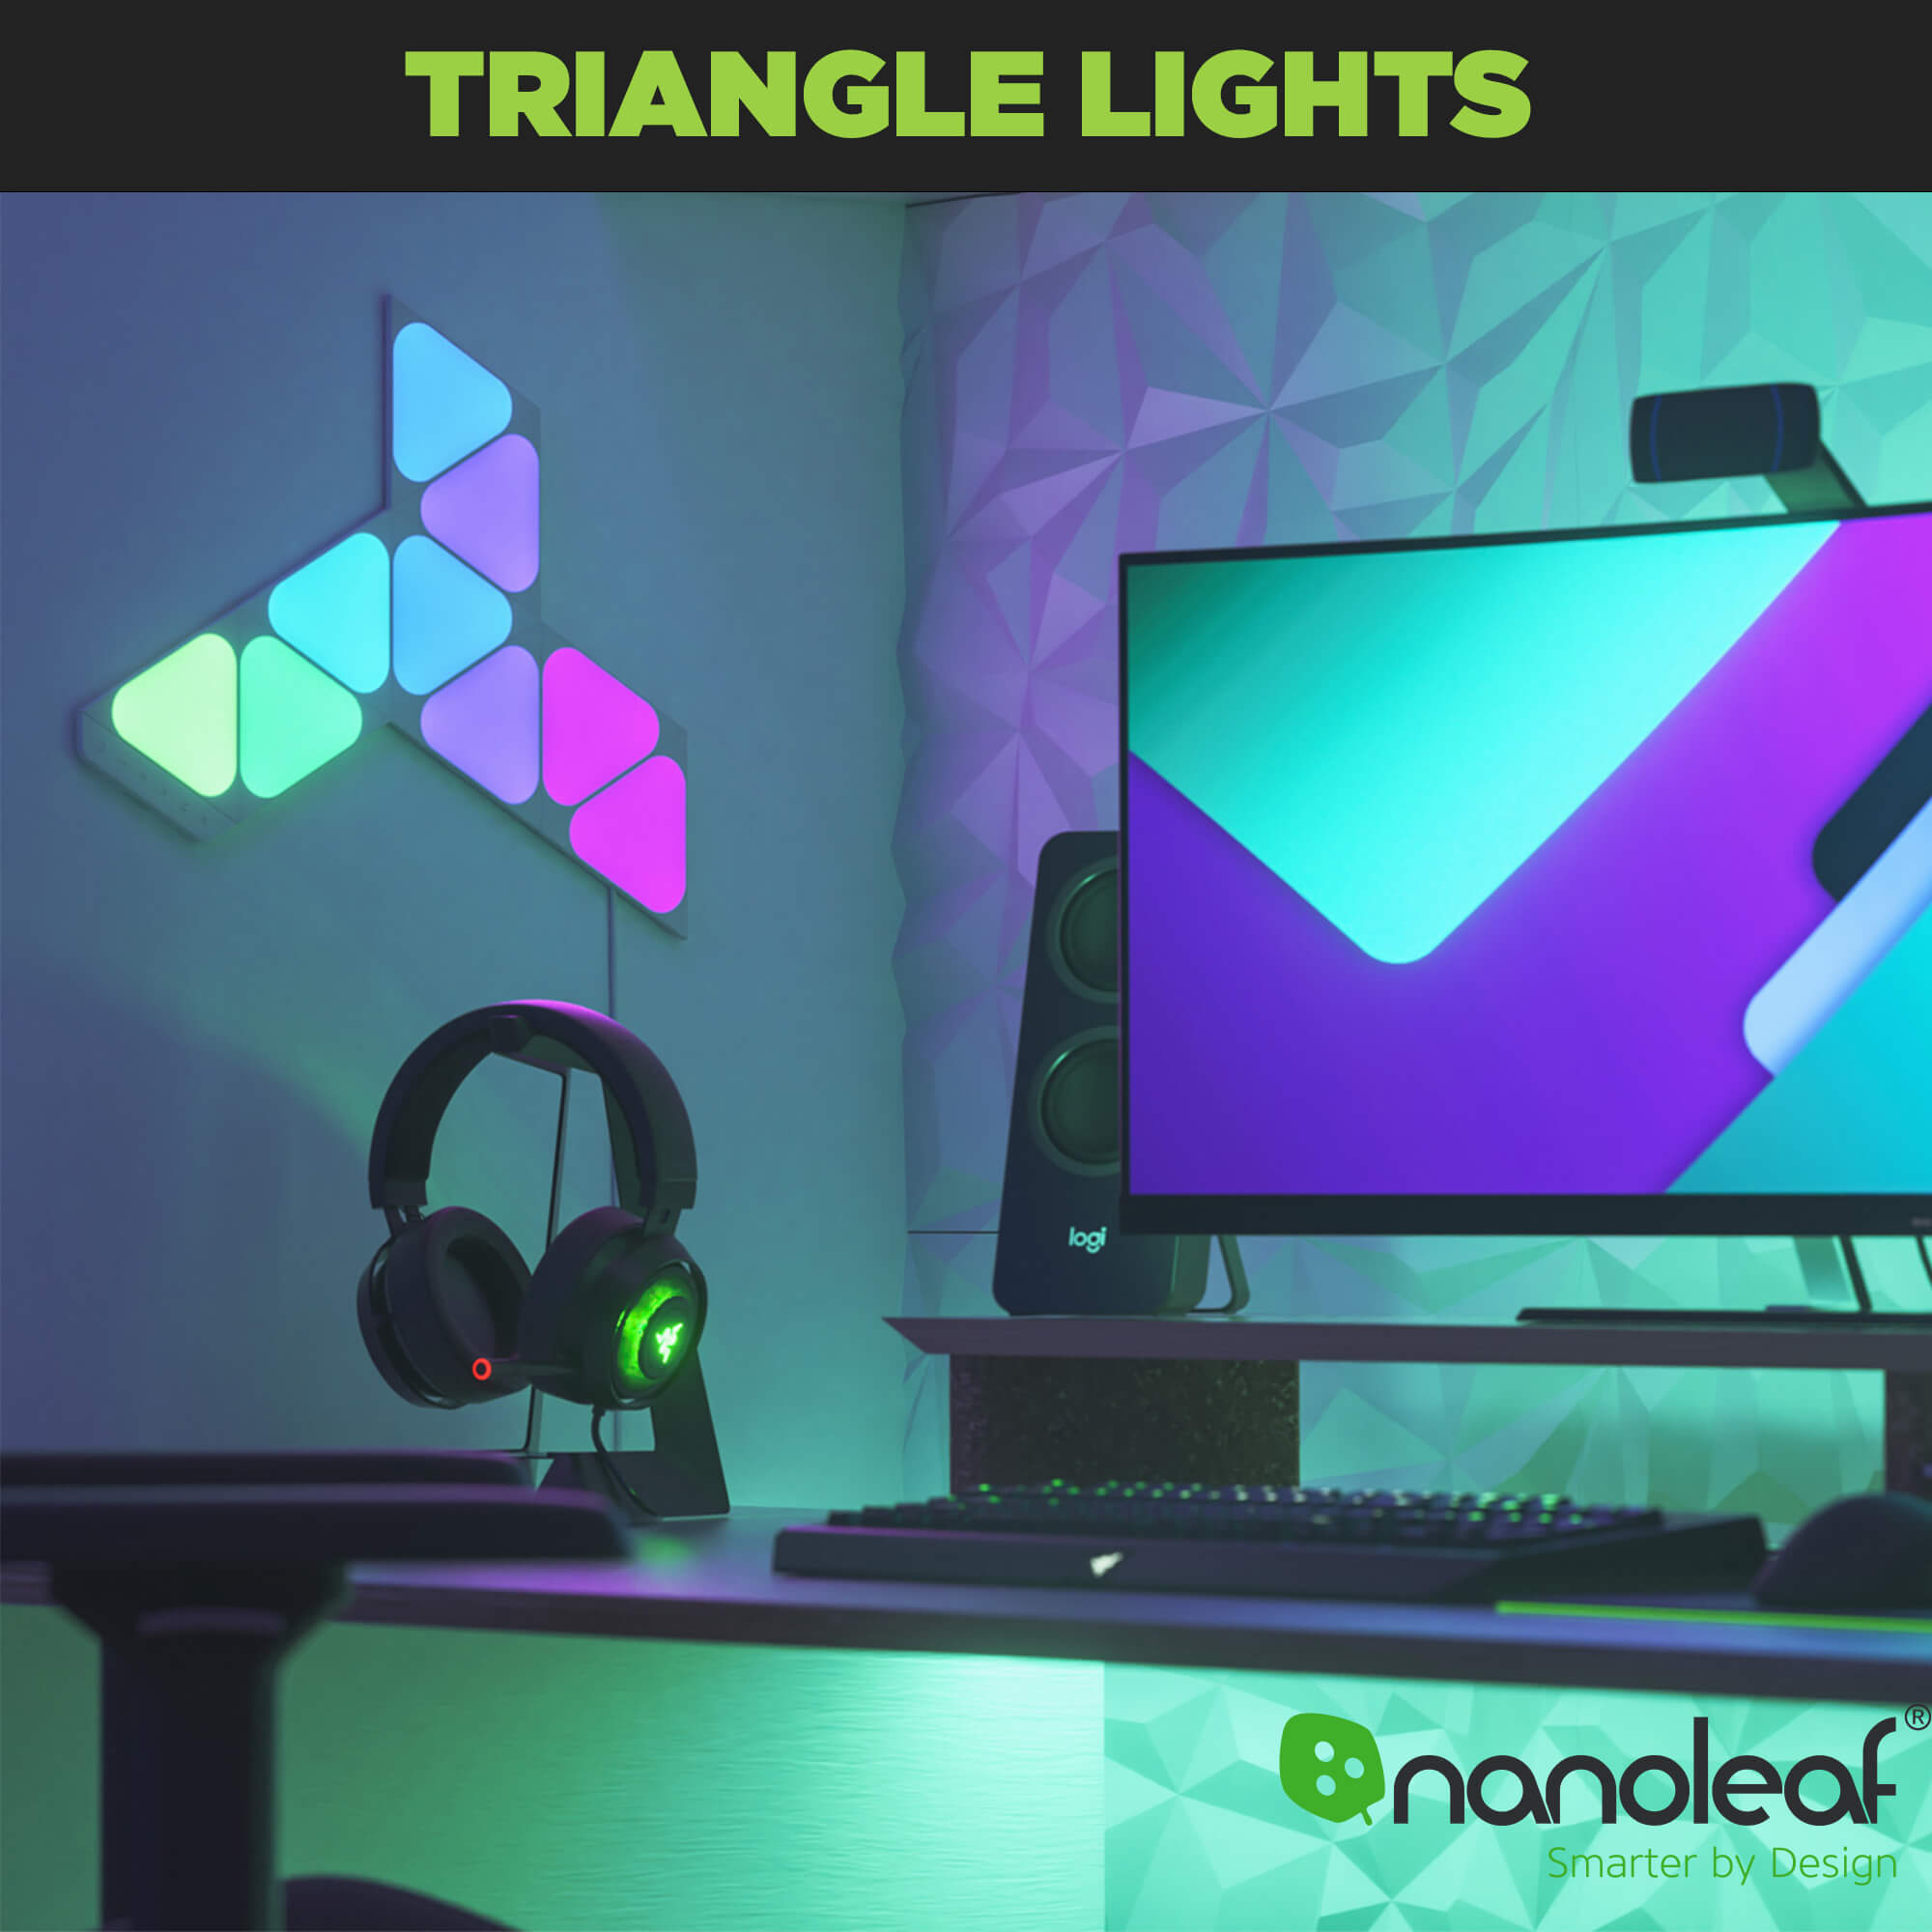 Nanoleaf triangle lights wall mounted next to gaming desk.